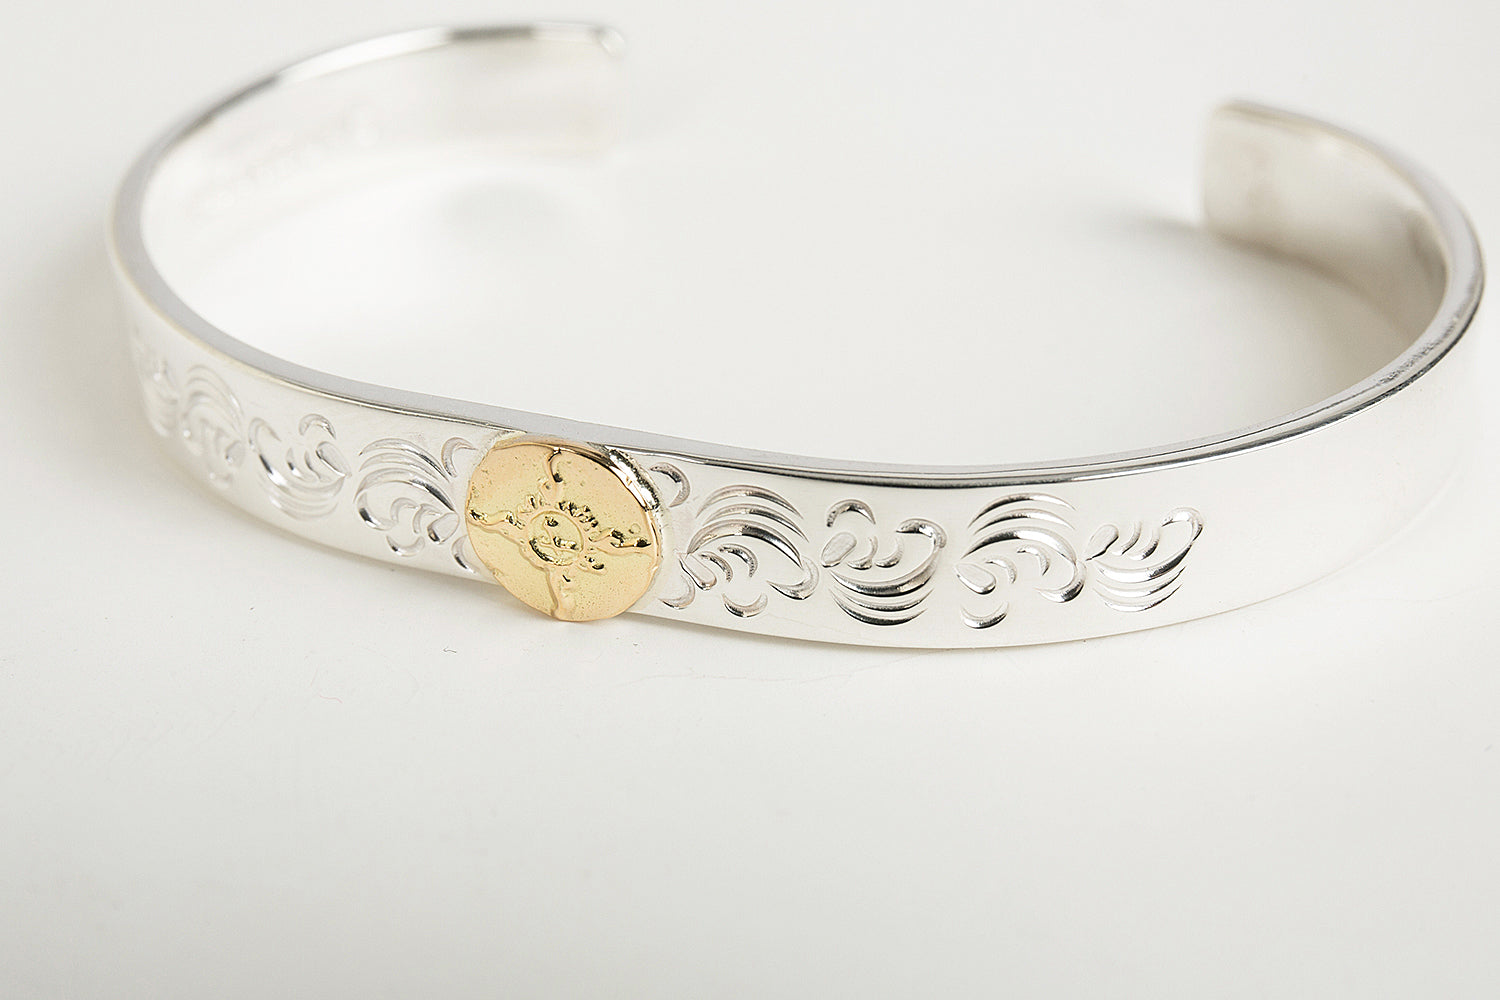 First Arrow's 8mm Silver Arabesque Bangle with 18k Gold Emblem (BR-013)